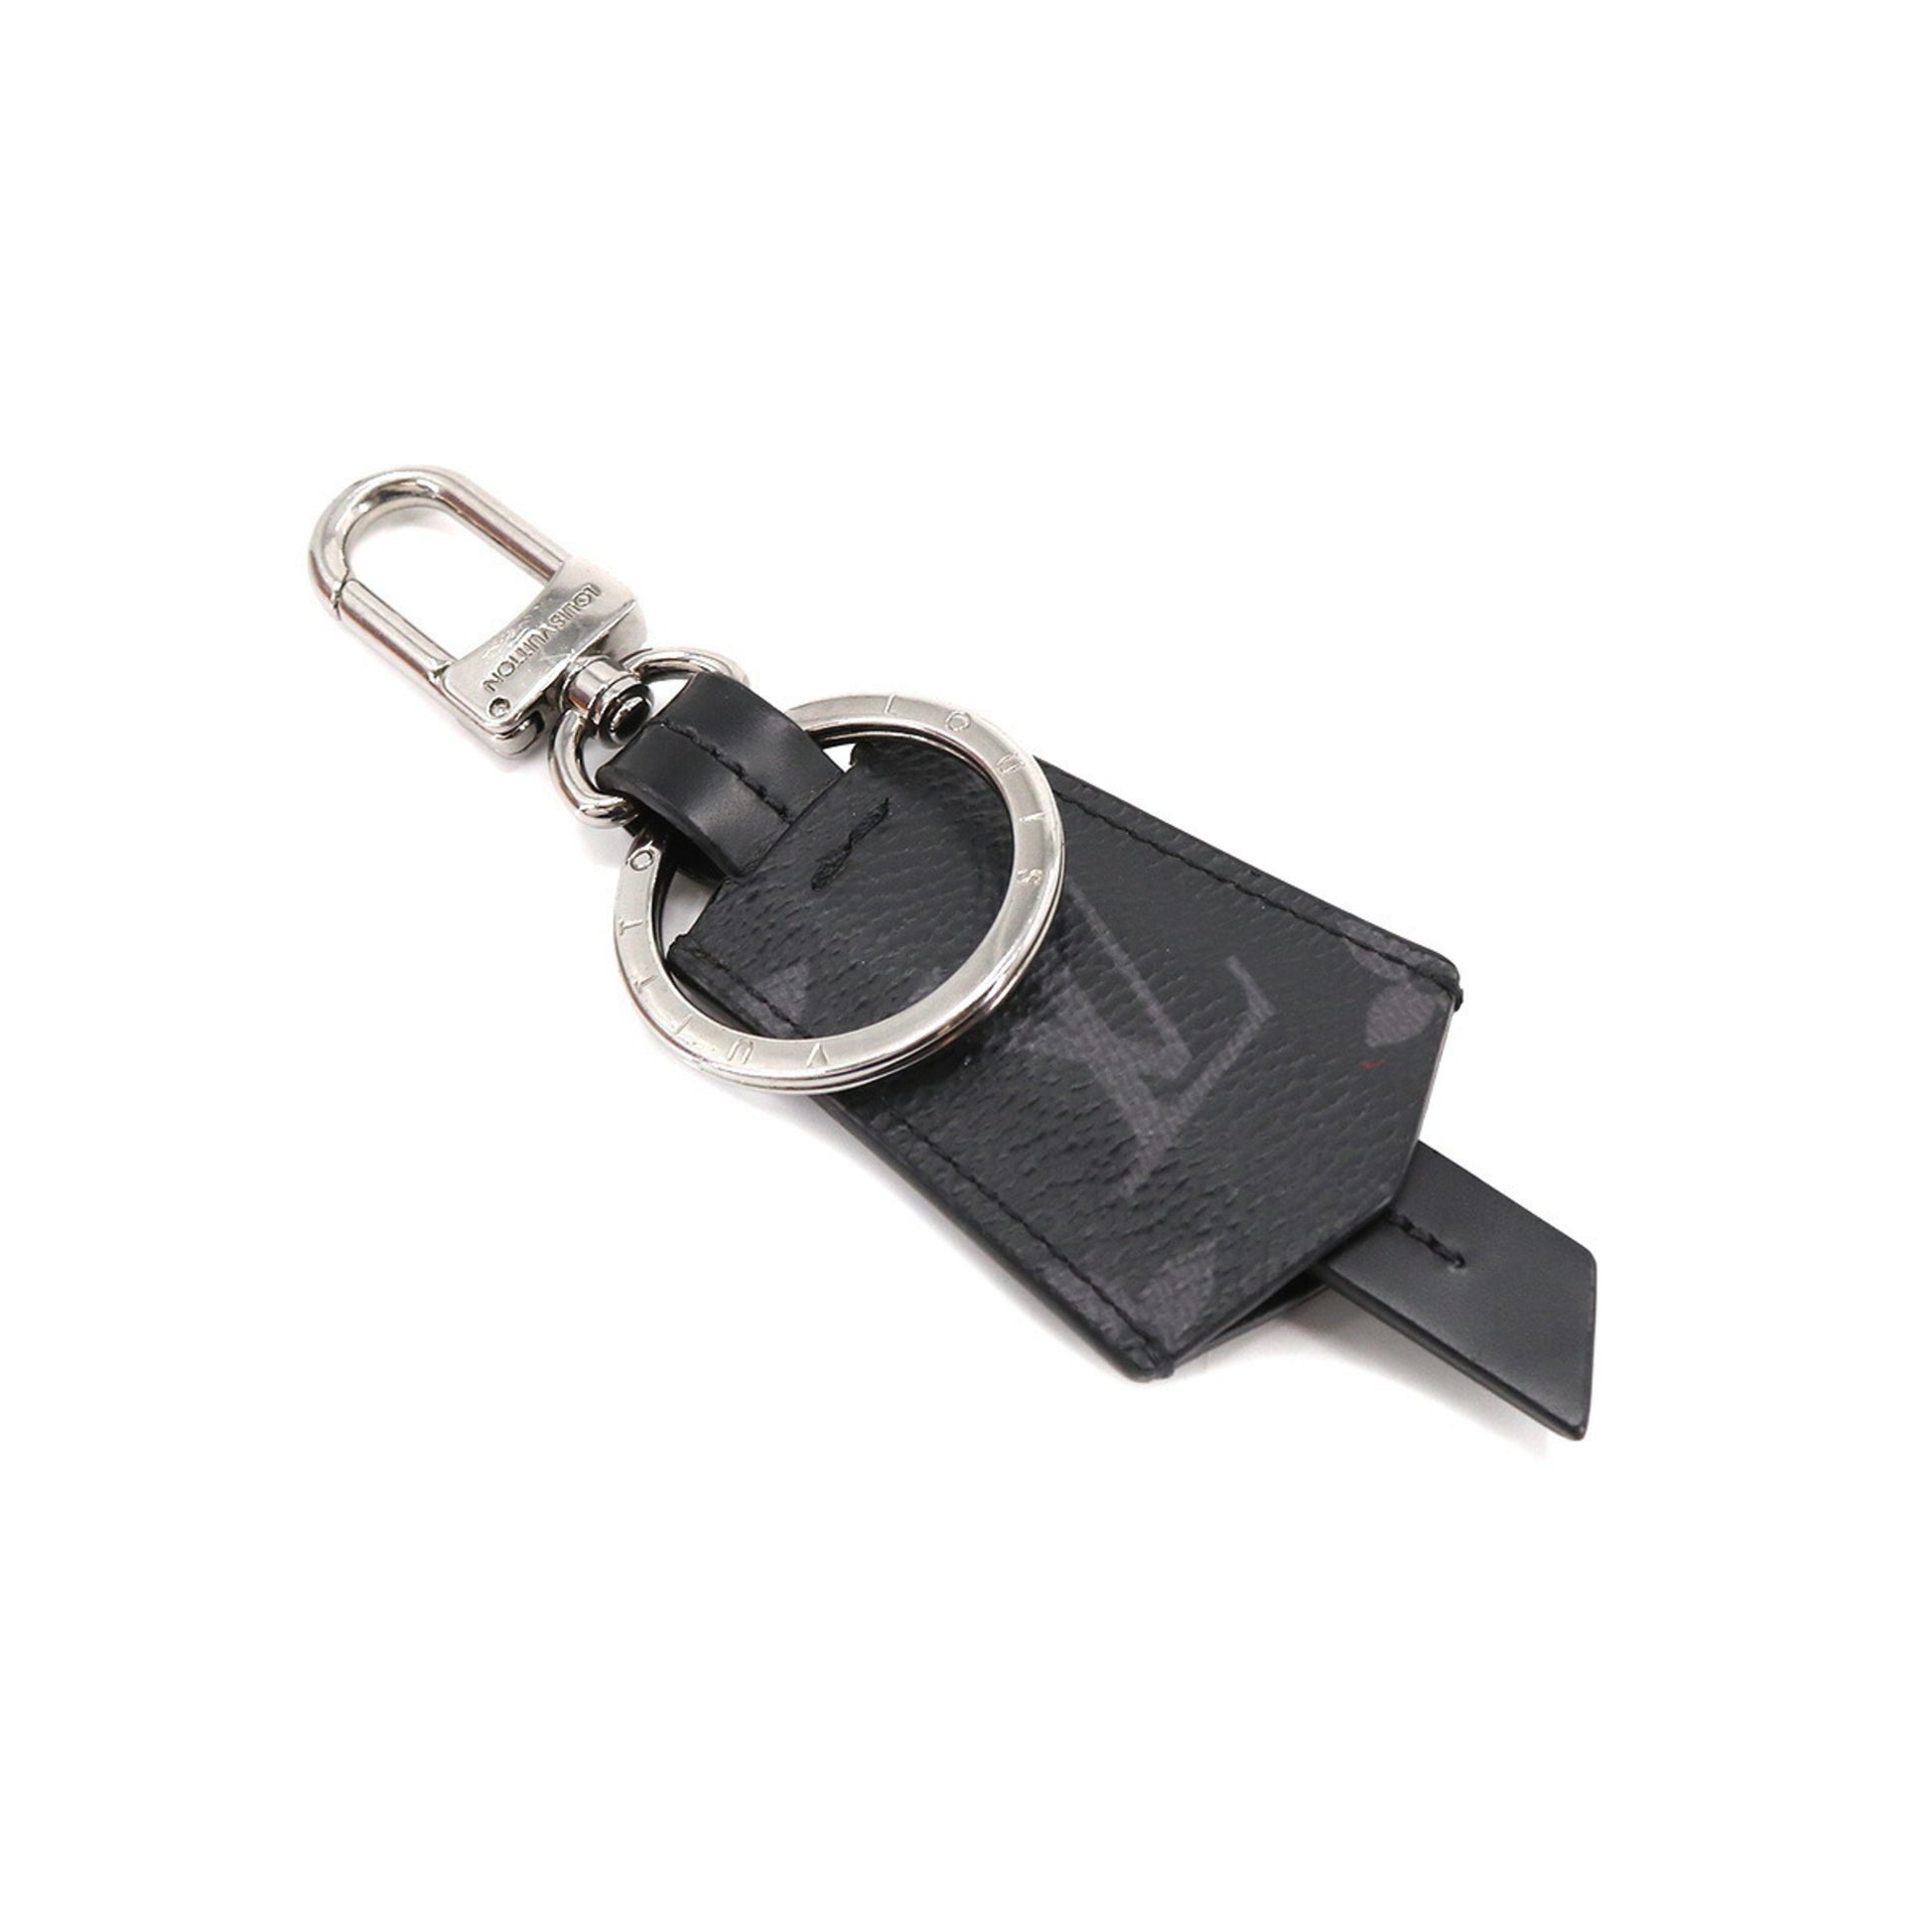 Shop Louis Vuitton Lv cloches-cles bag charm and key holder (M63620) by  BrandShoppe